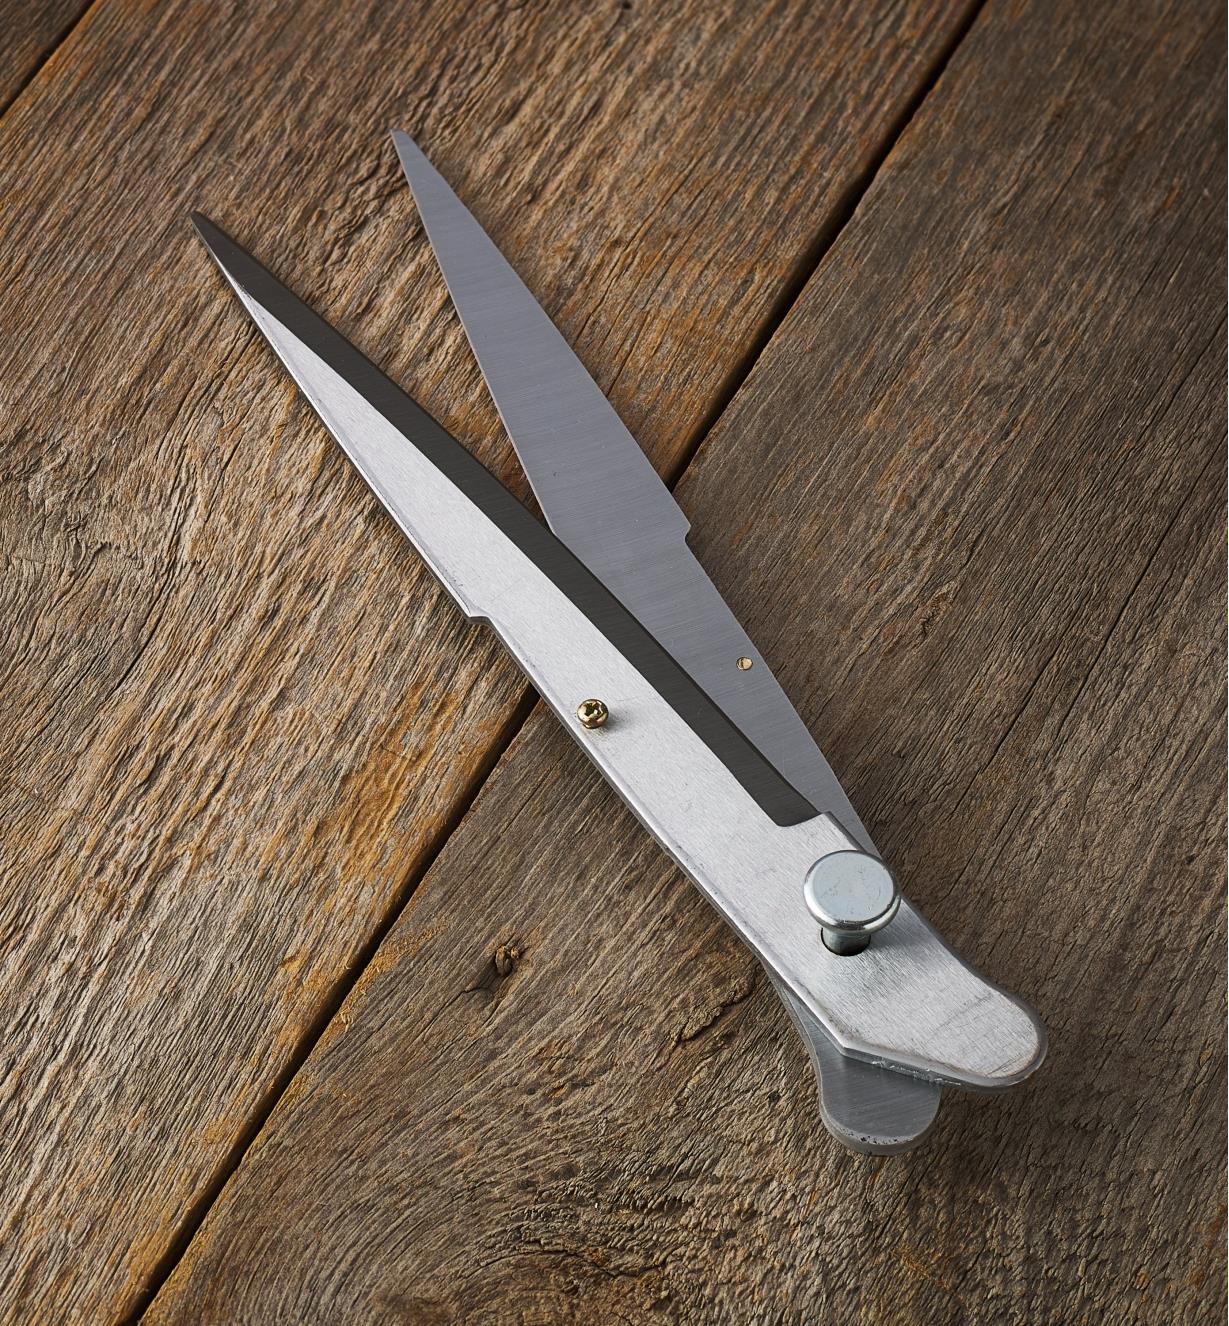 EC528 - Replacement Blade for Long-Handled Shears